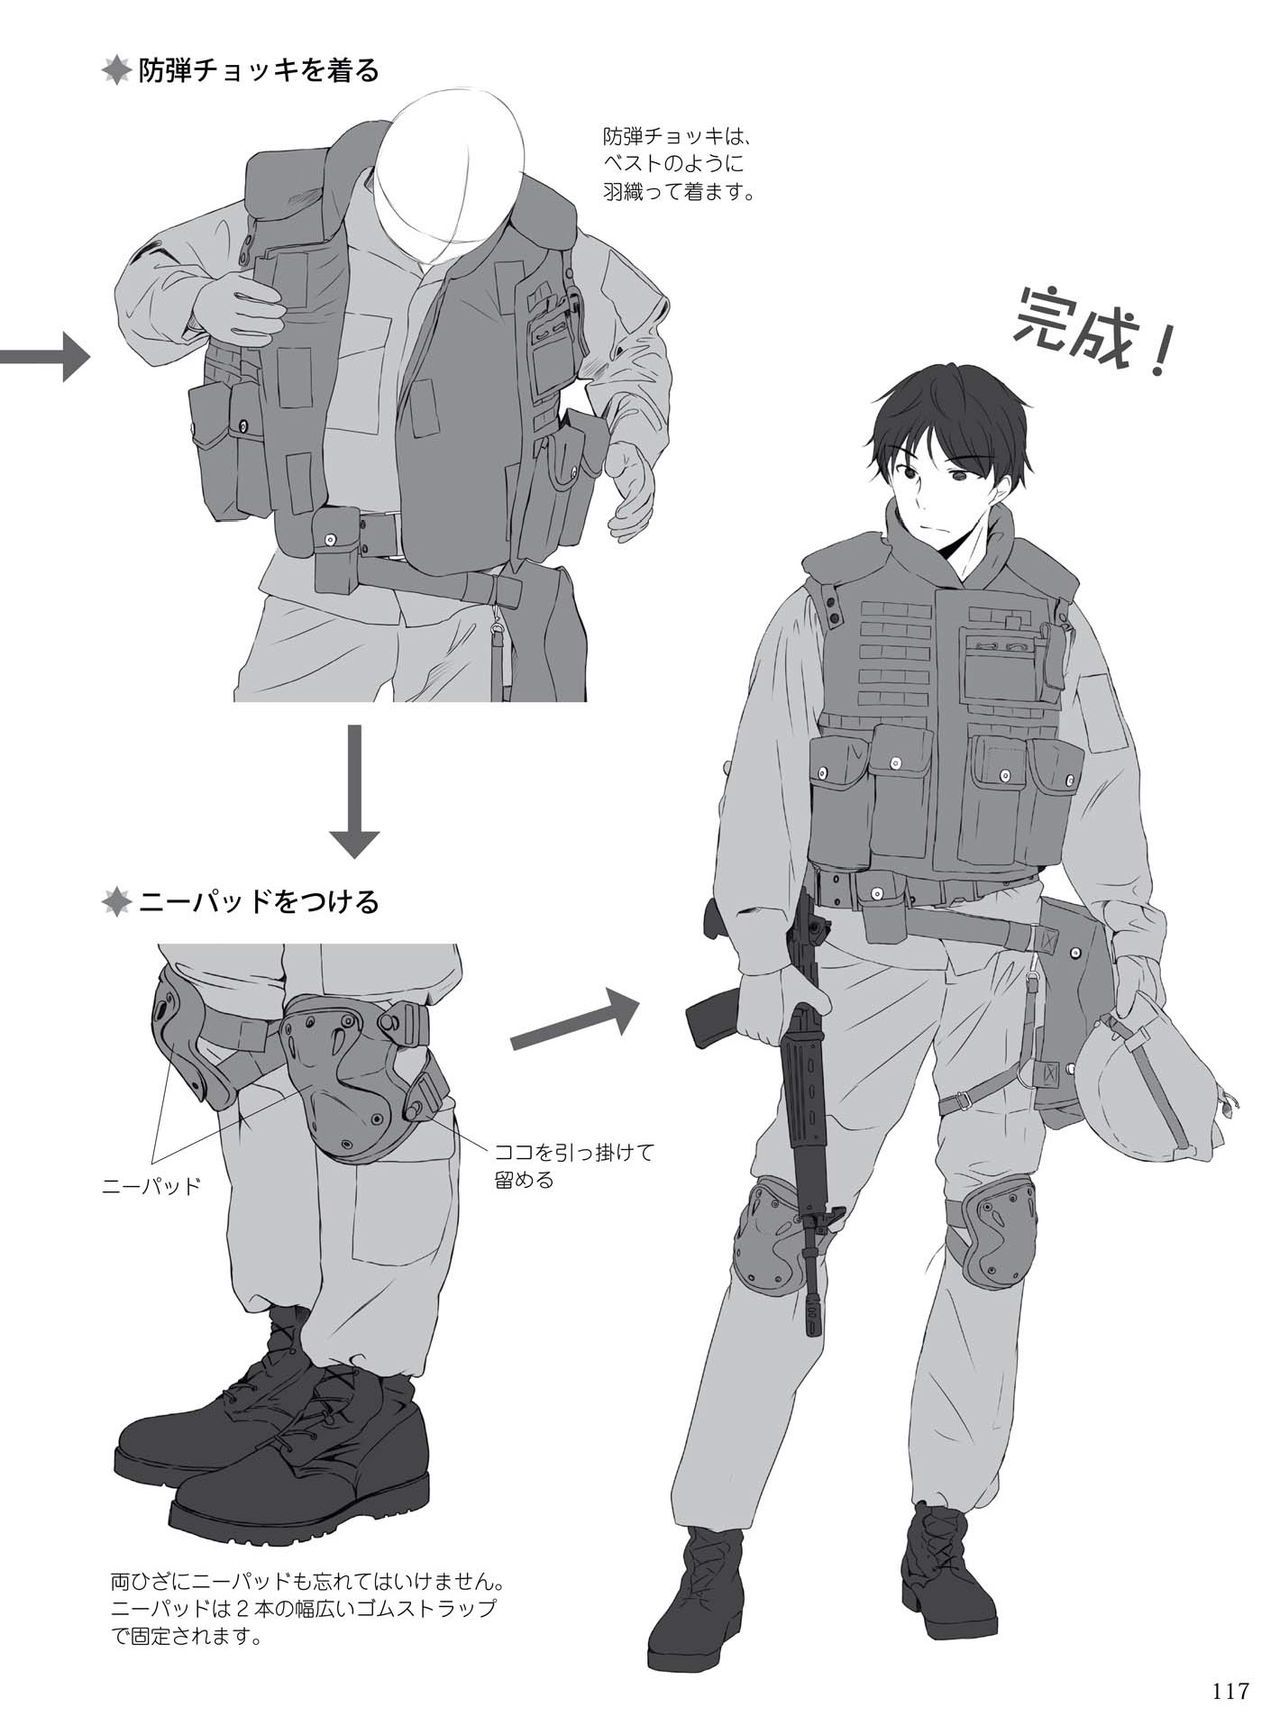 How to draw military uniforms and uniforms From Self-Defense Forces 軍服・制服の描き方 アメリカ軍・自衛隊の制服から戦闘服まで 120